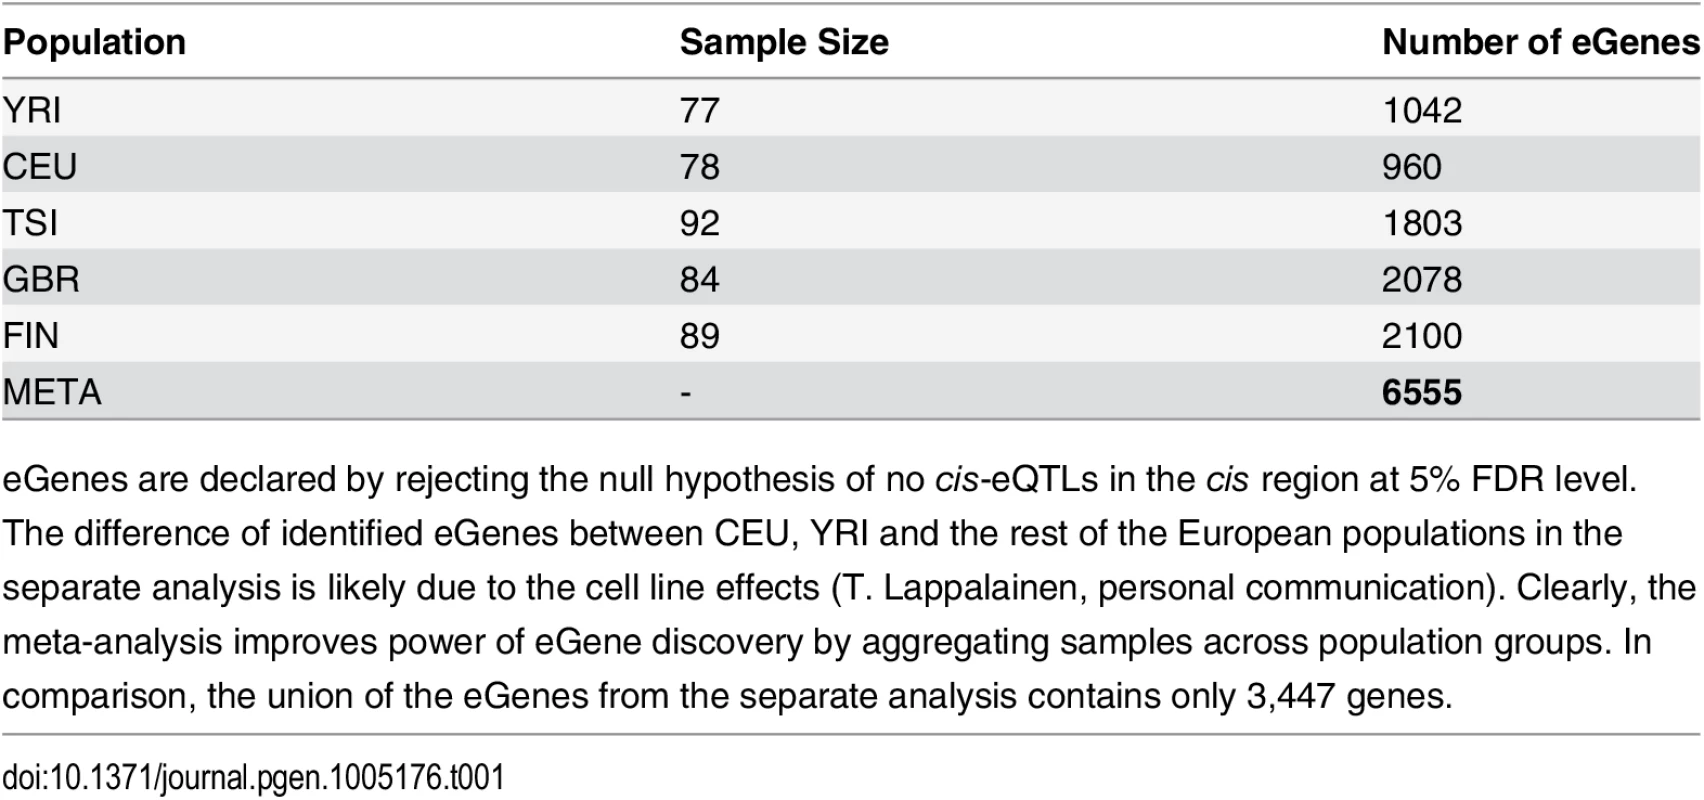 Comparison of eGene Discovery by Separate vs. Meta Analysis.